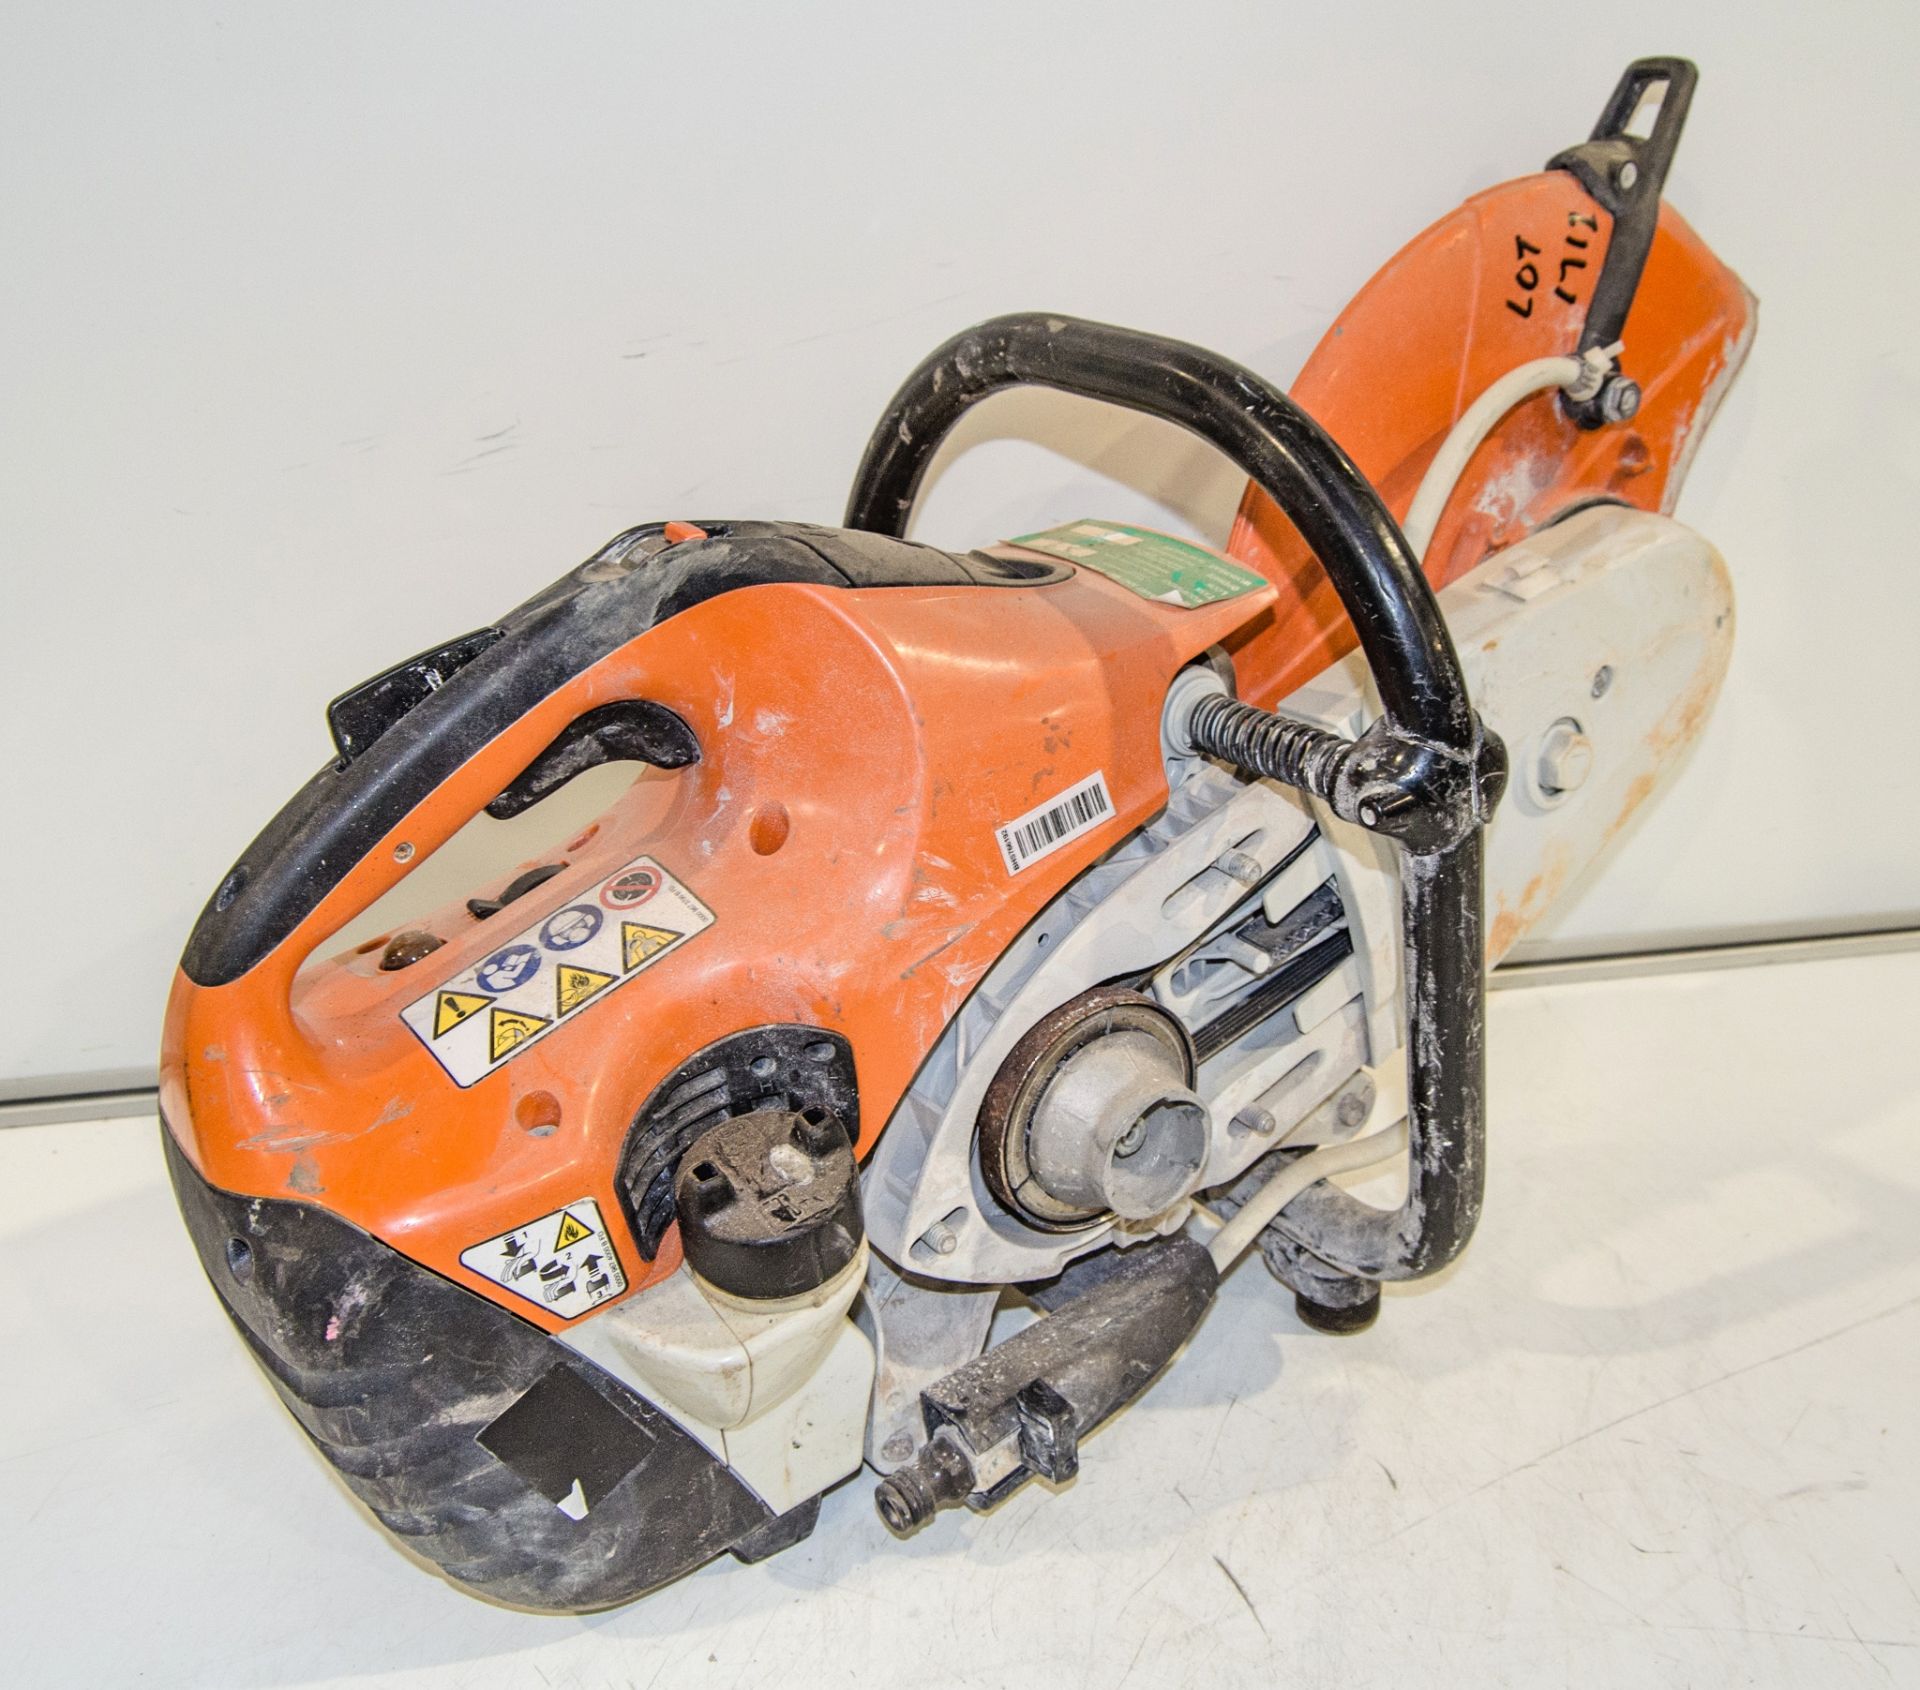 Stihl TS410 petrol driven cut off saw ** Pull cord assembly missing ** 19015183 - Image 2 of 2